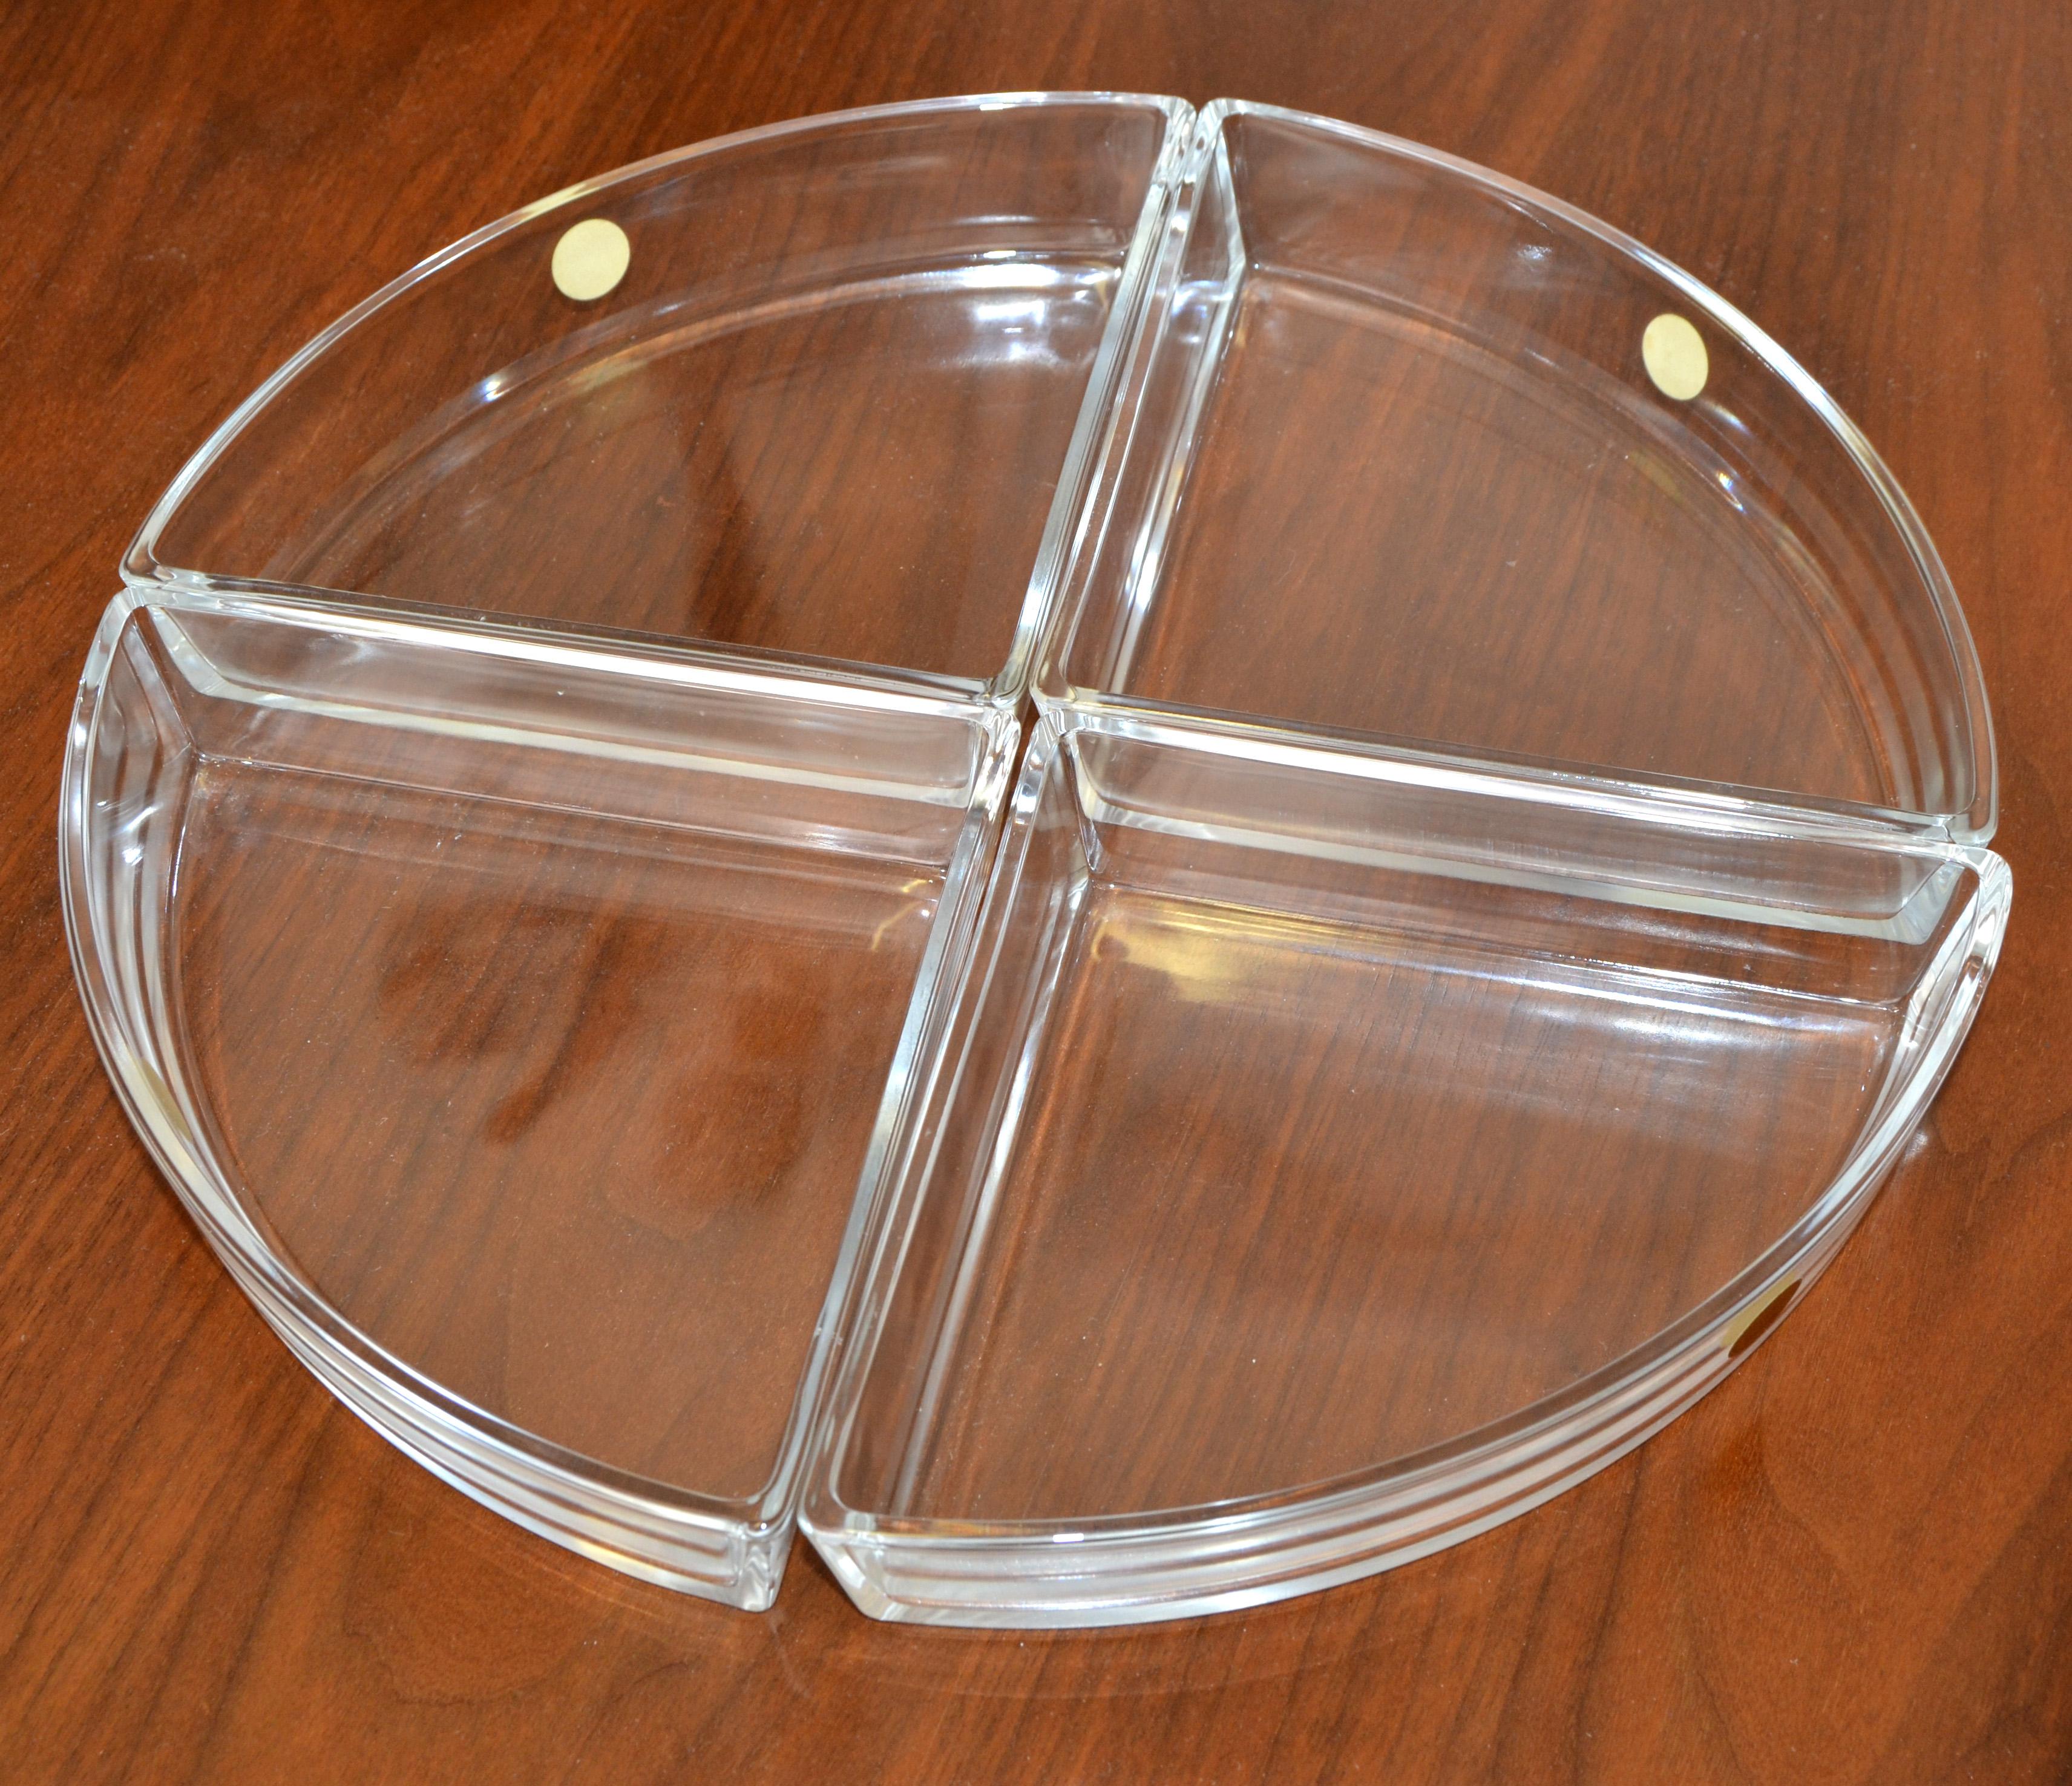 This Listing offers the Alessi 4 compartments Hors d'oeuvres service in crystal glass designed by Ettore Sottsass, made in Italy, circa 1970s. 
Mid-Century Modern Serveware, Barware in minimalism design and heavy lead crystal. 
All 4 Triangle